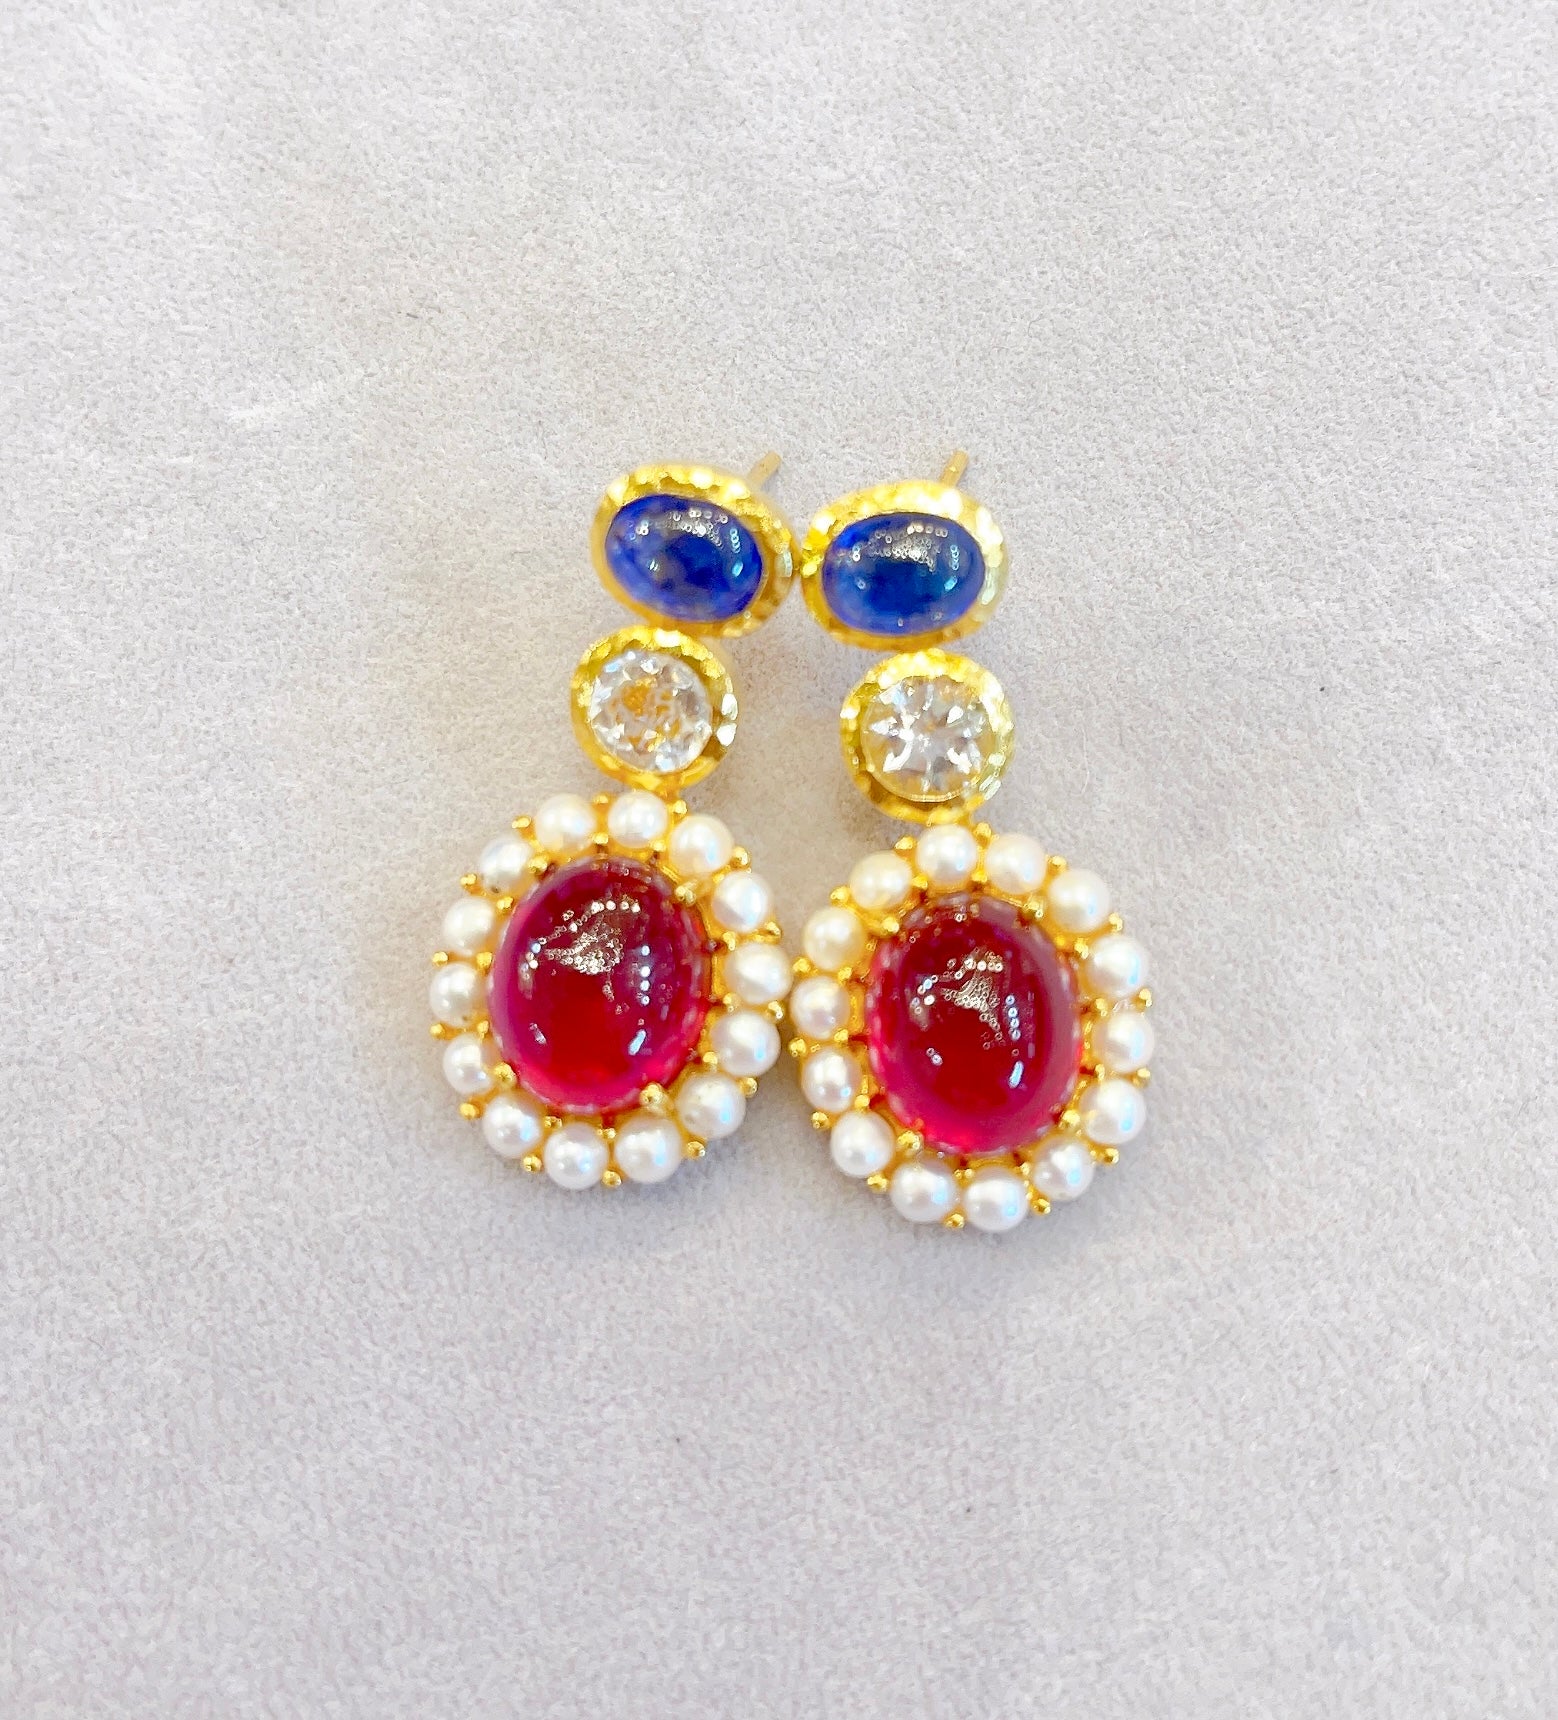 Bochic Drop Earrings
Ruby Natural / Cabochon / 19 Carat 
Sapphire Natural / Cabochon / 5 Carat 
White Topaz Natural / Round Brilliant / 2 Carat 
White pearls 
Silver and 22K Gold plating 
Gold Plating to 3 microns 
This earrings is perfect to wear